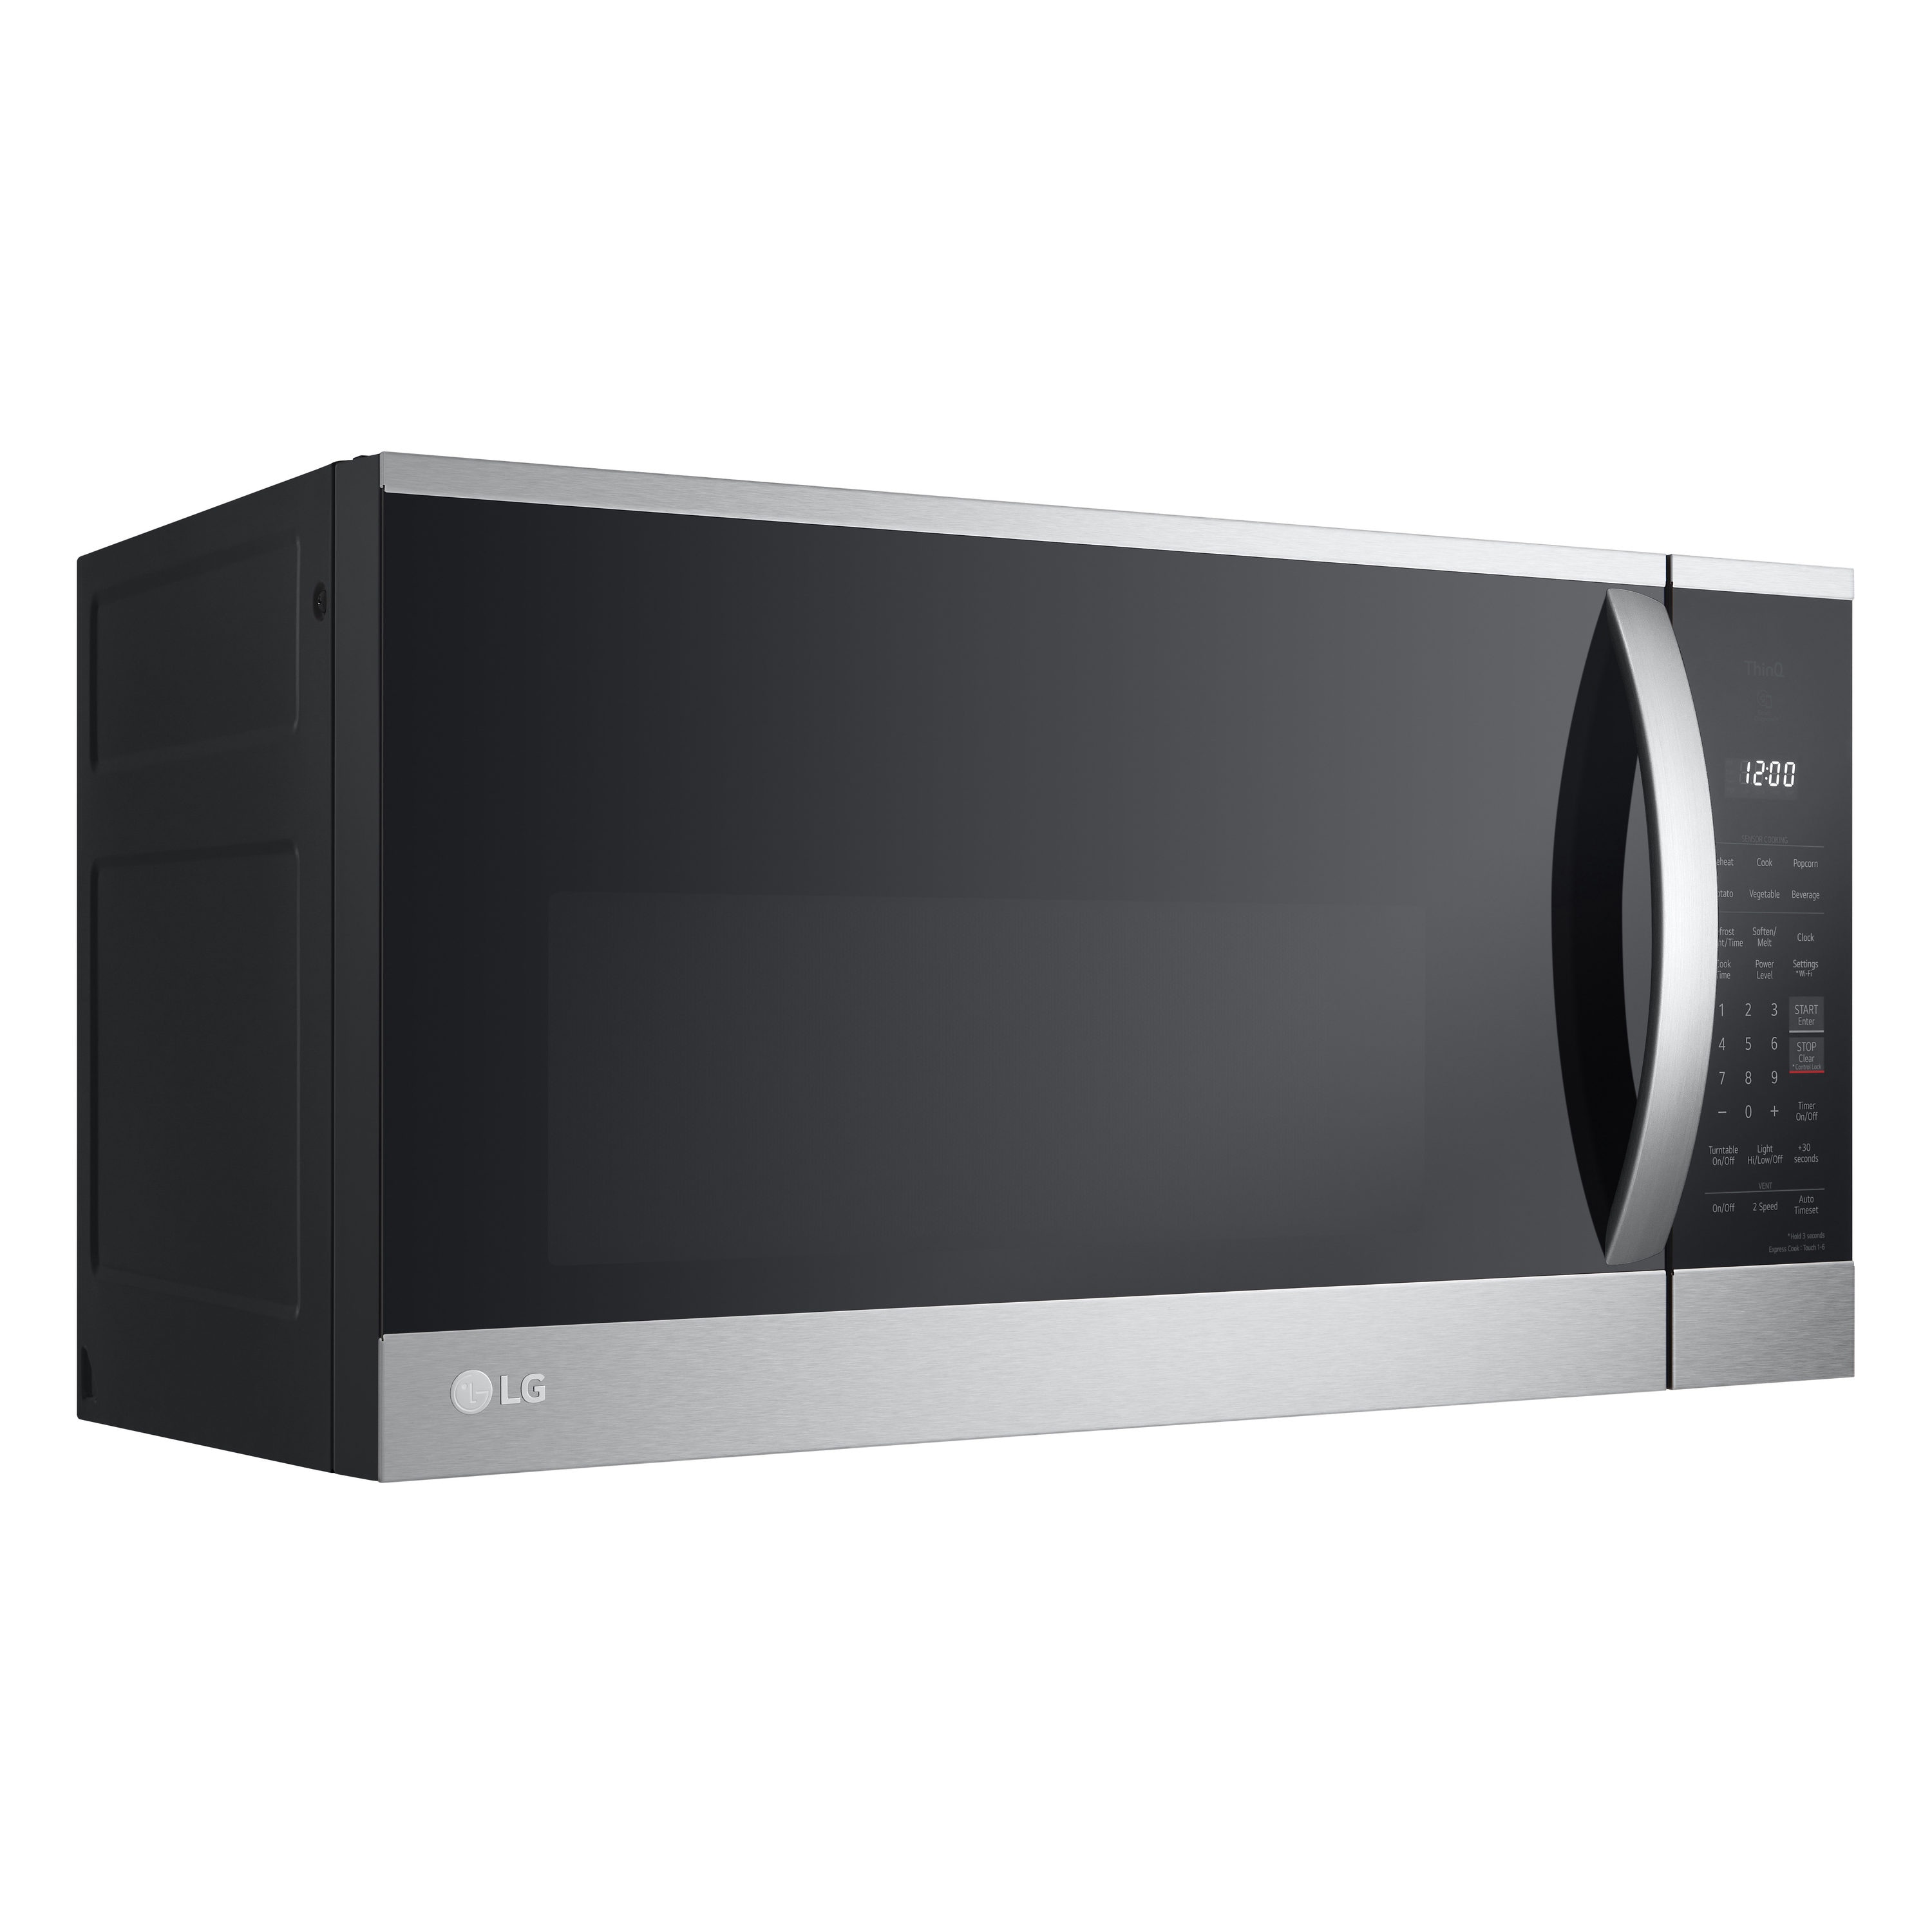 ft in Cooking Microwaves Stainless 1000-Watt Over-the-Range (Printproof with Microwave the Steel) at LG Smart 1.8-cu department Over-the-Range Sensor